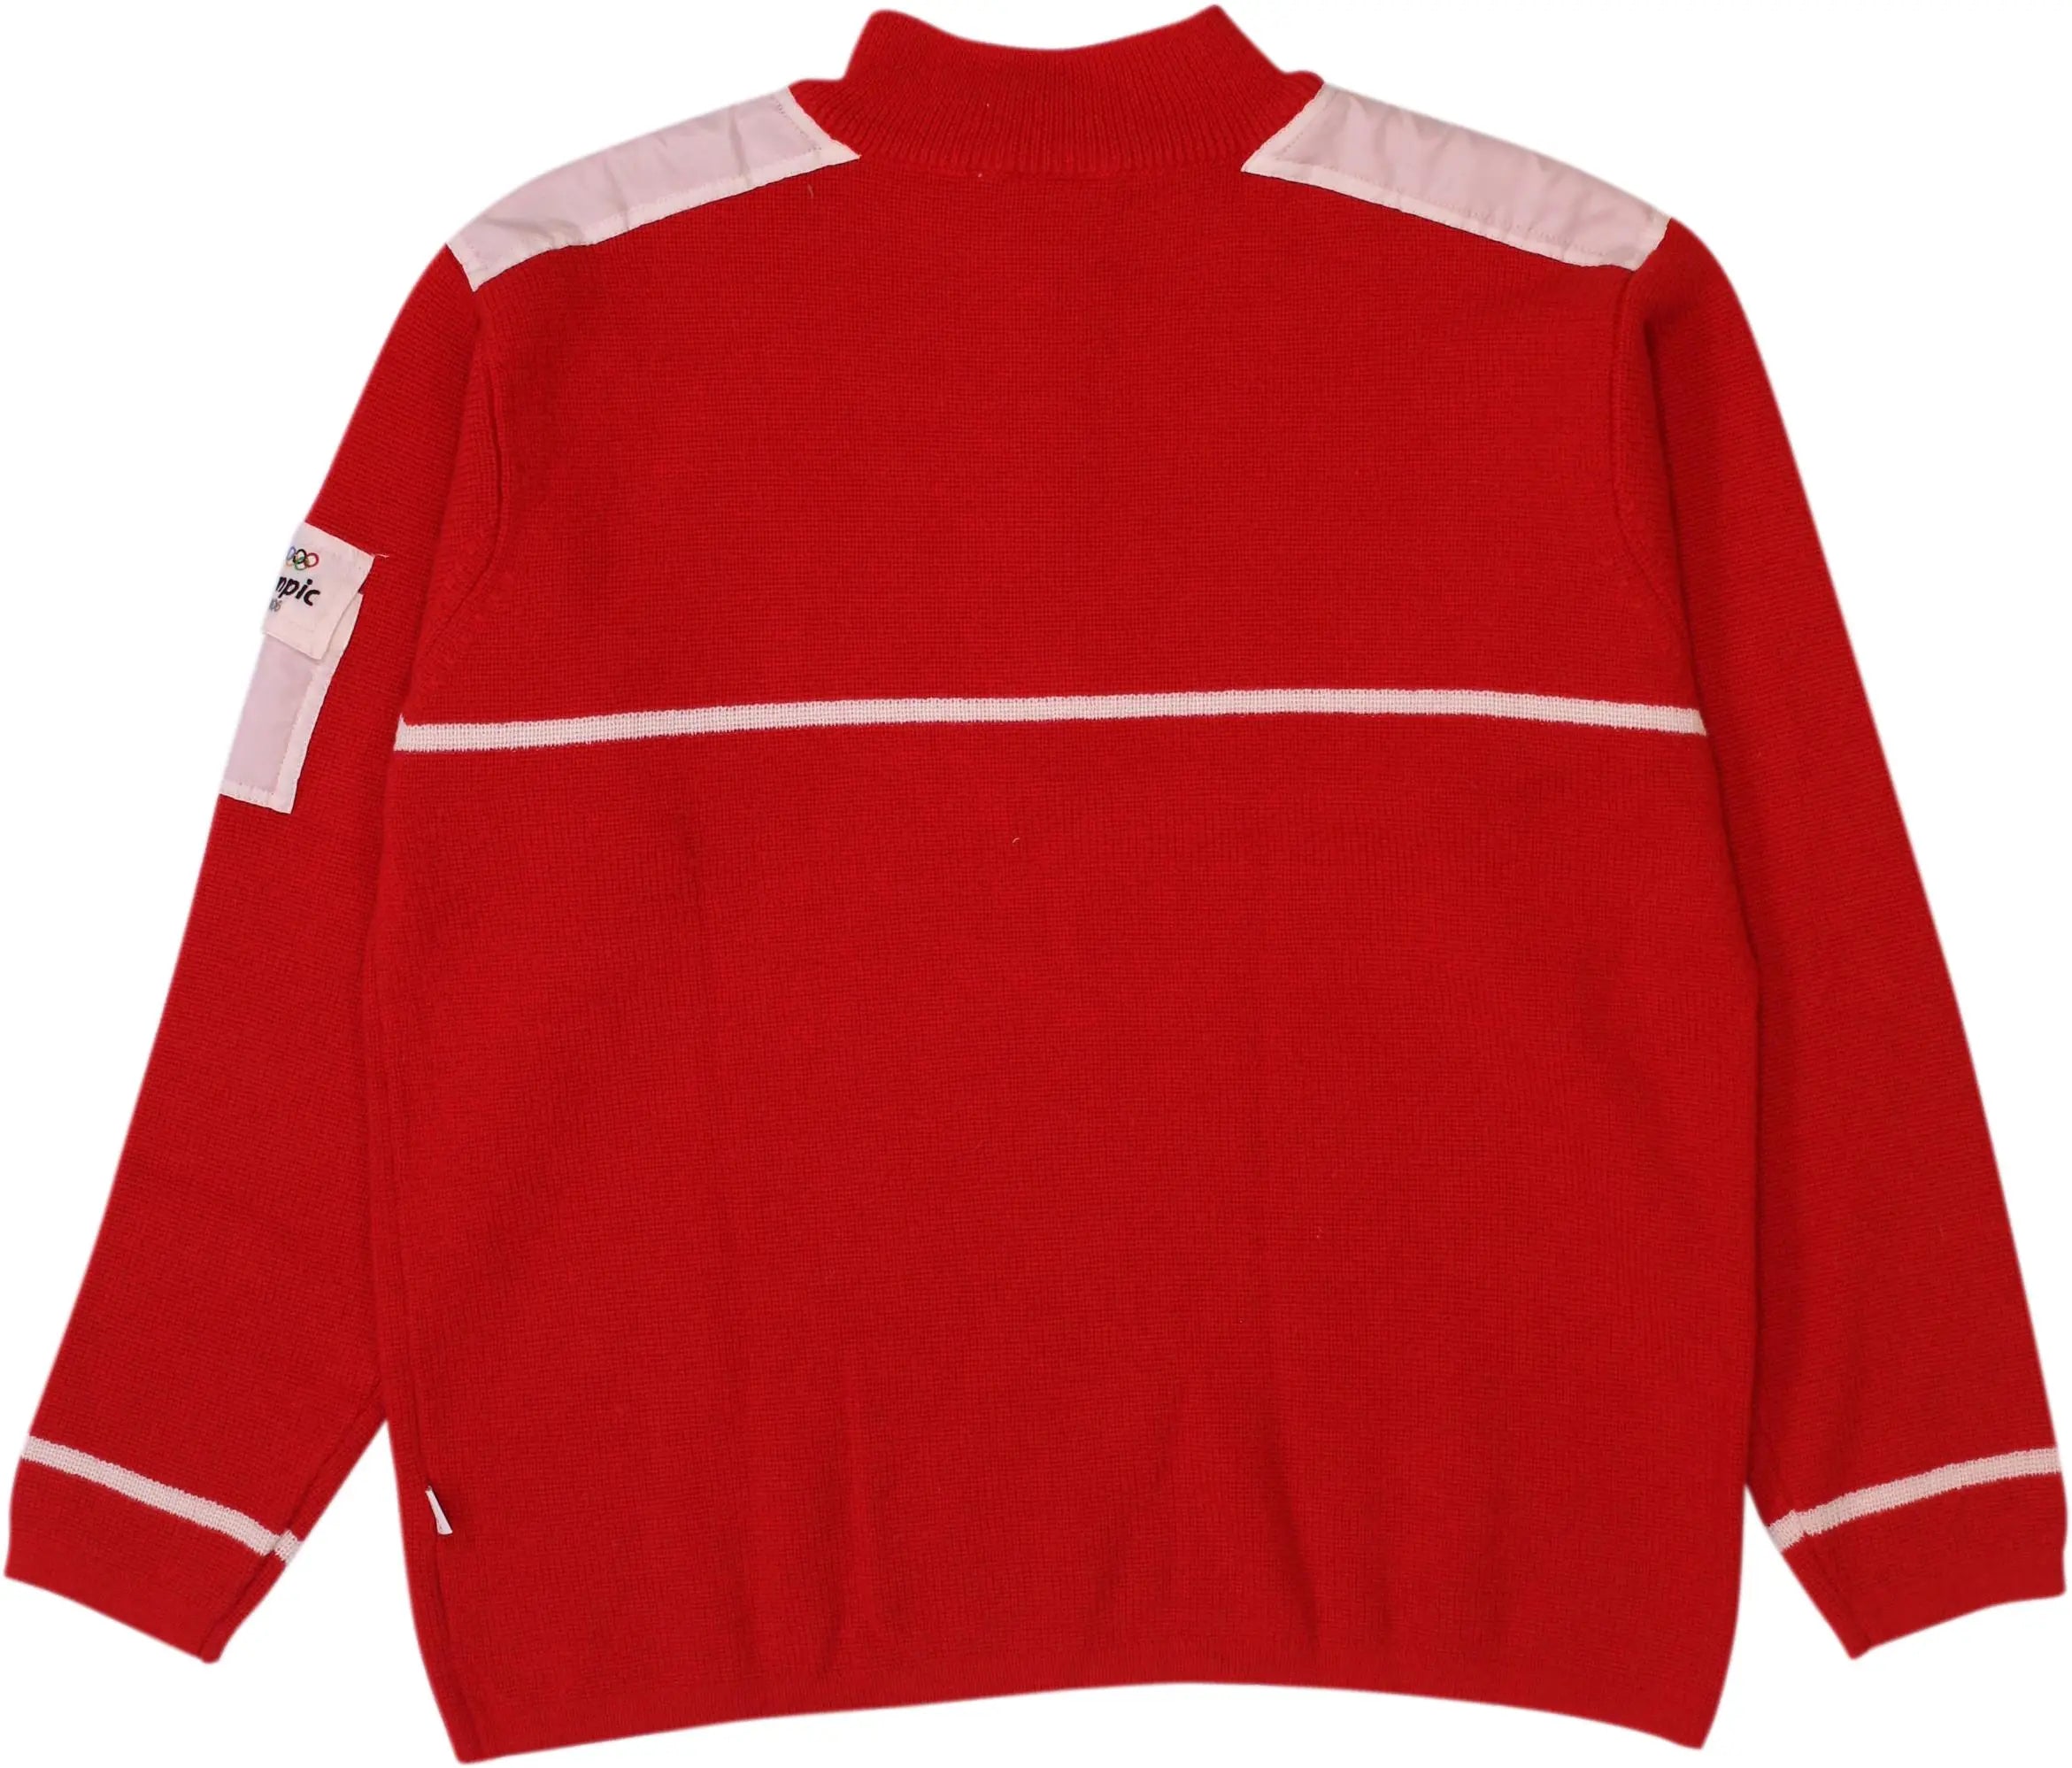 Swiss Olympic Team - Swiss Olympic Team 2006 Knitted Sweater- ThriftTale.com - Vintage and second handclothing